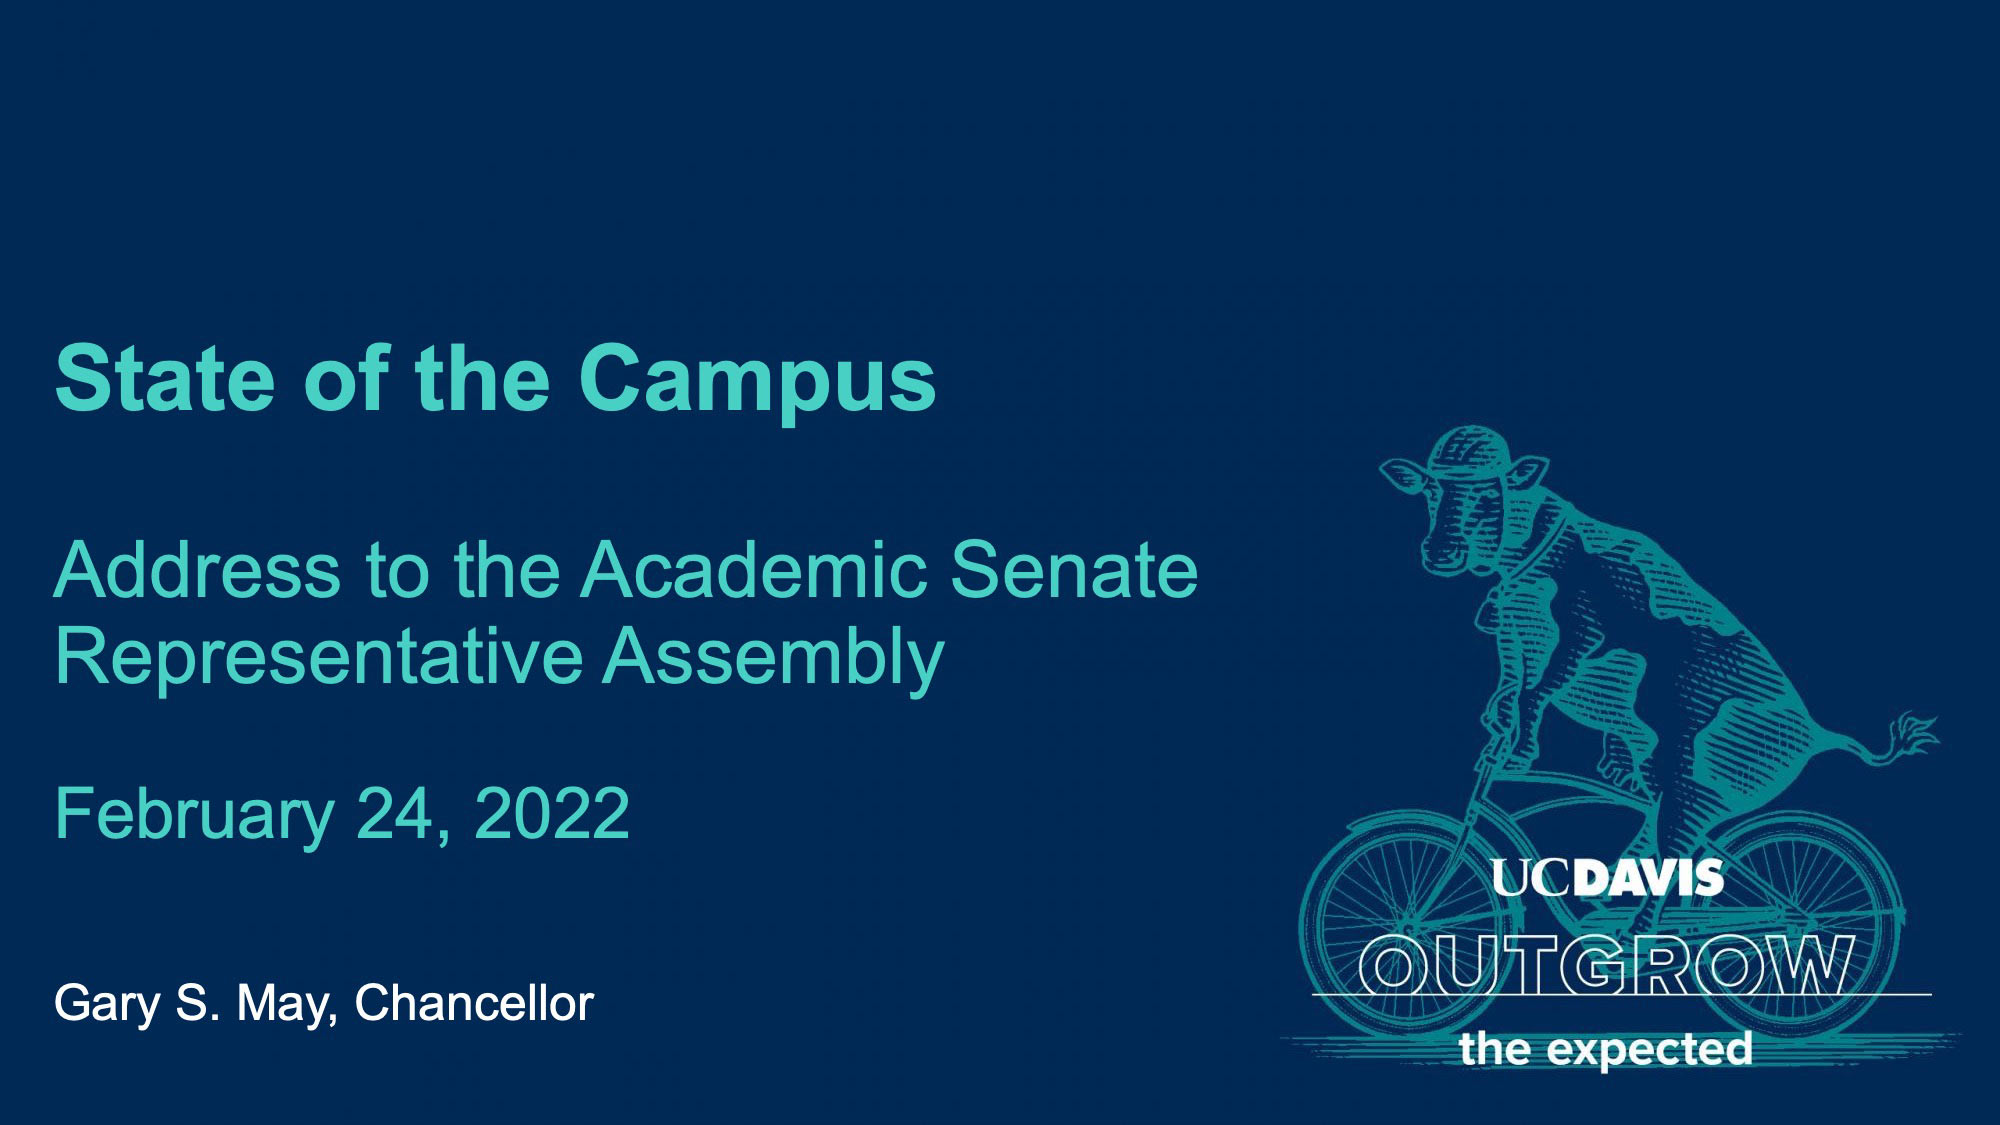 "State of the Campus" title slide with drawing of cow on bicycle, plus audience, date and chancellor's name